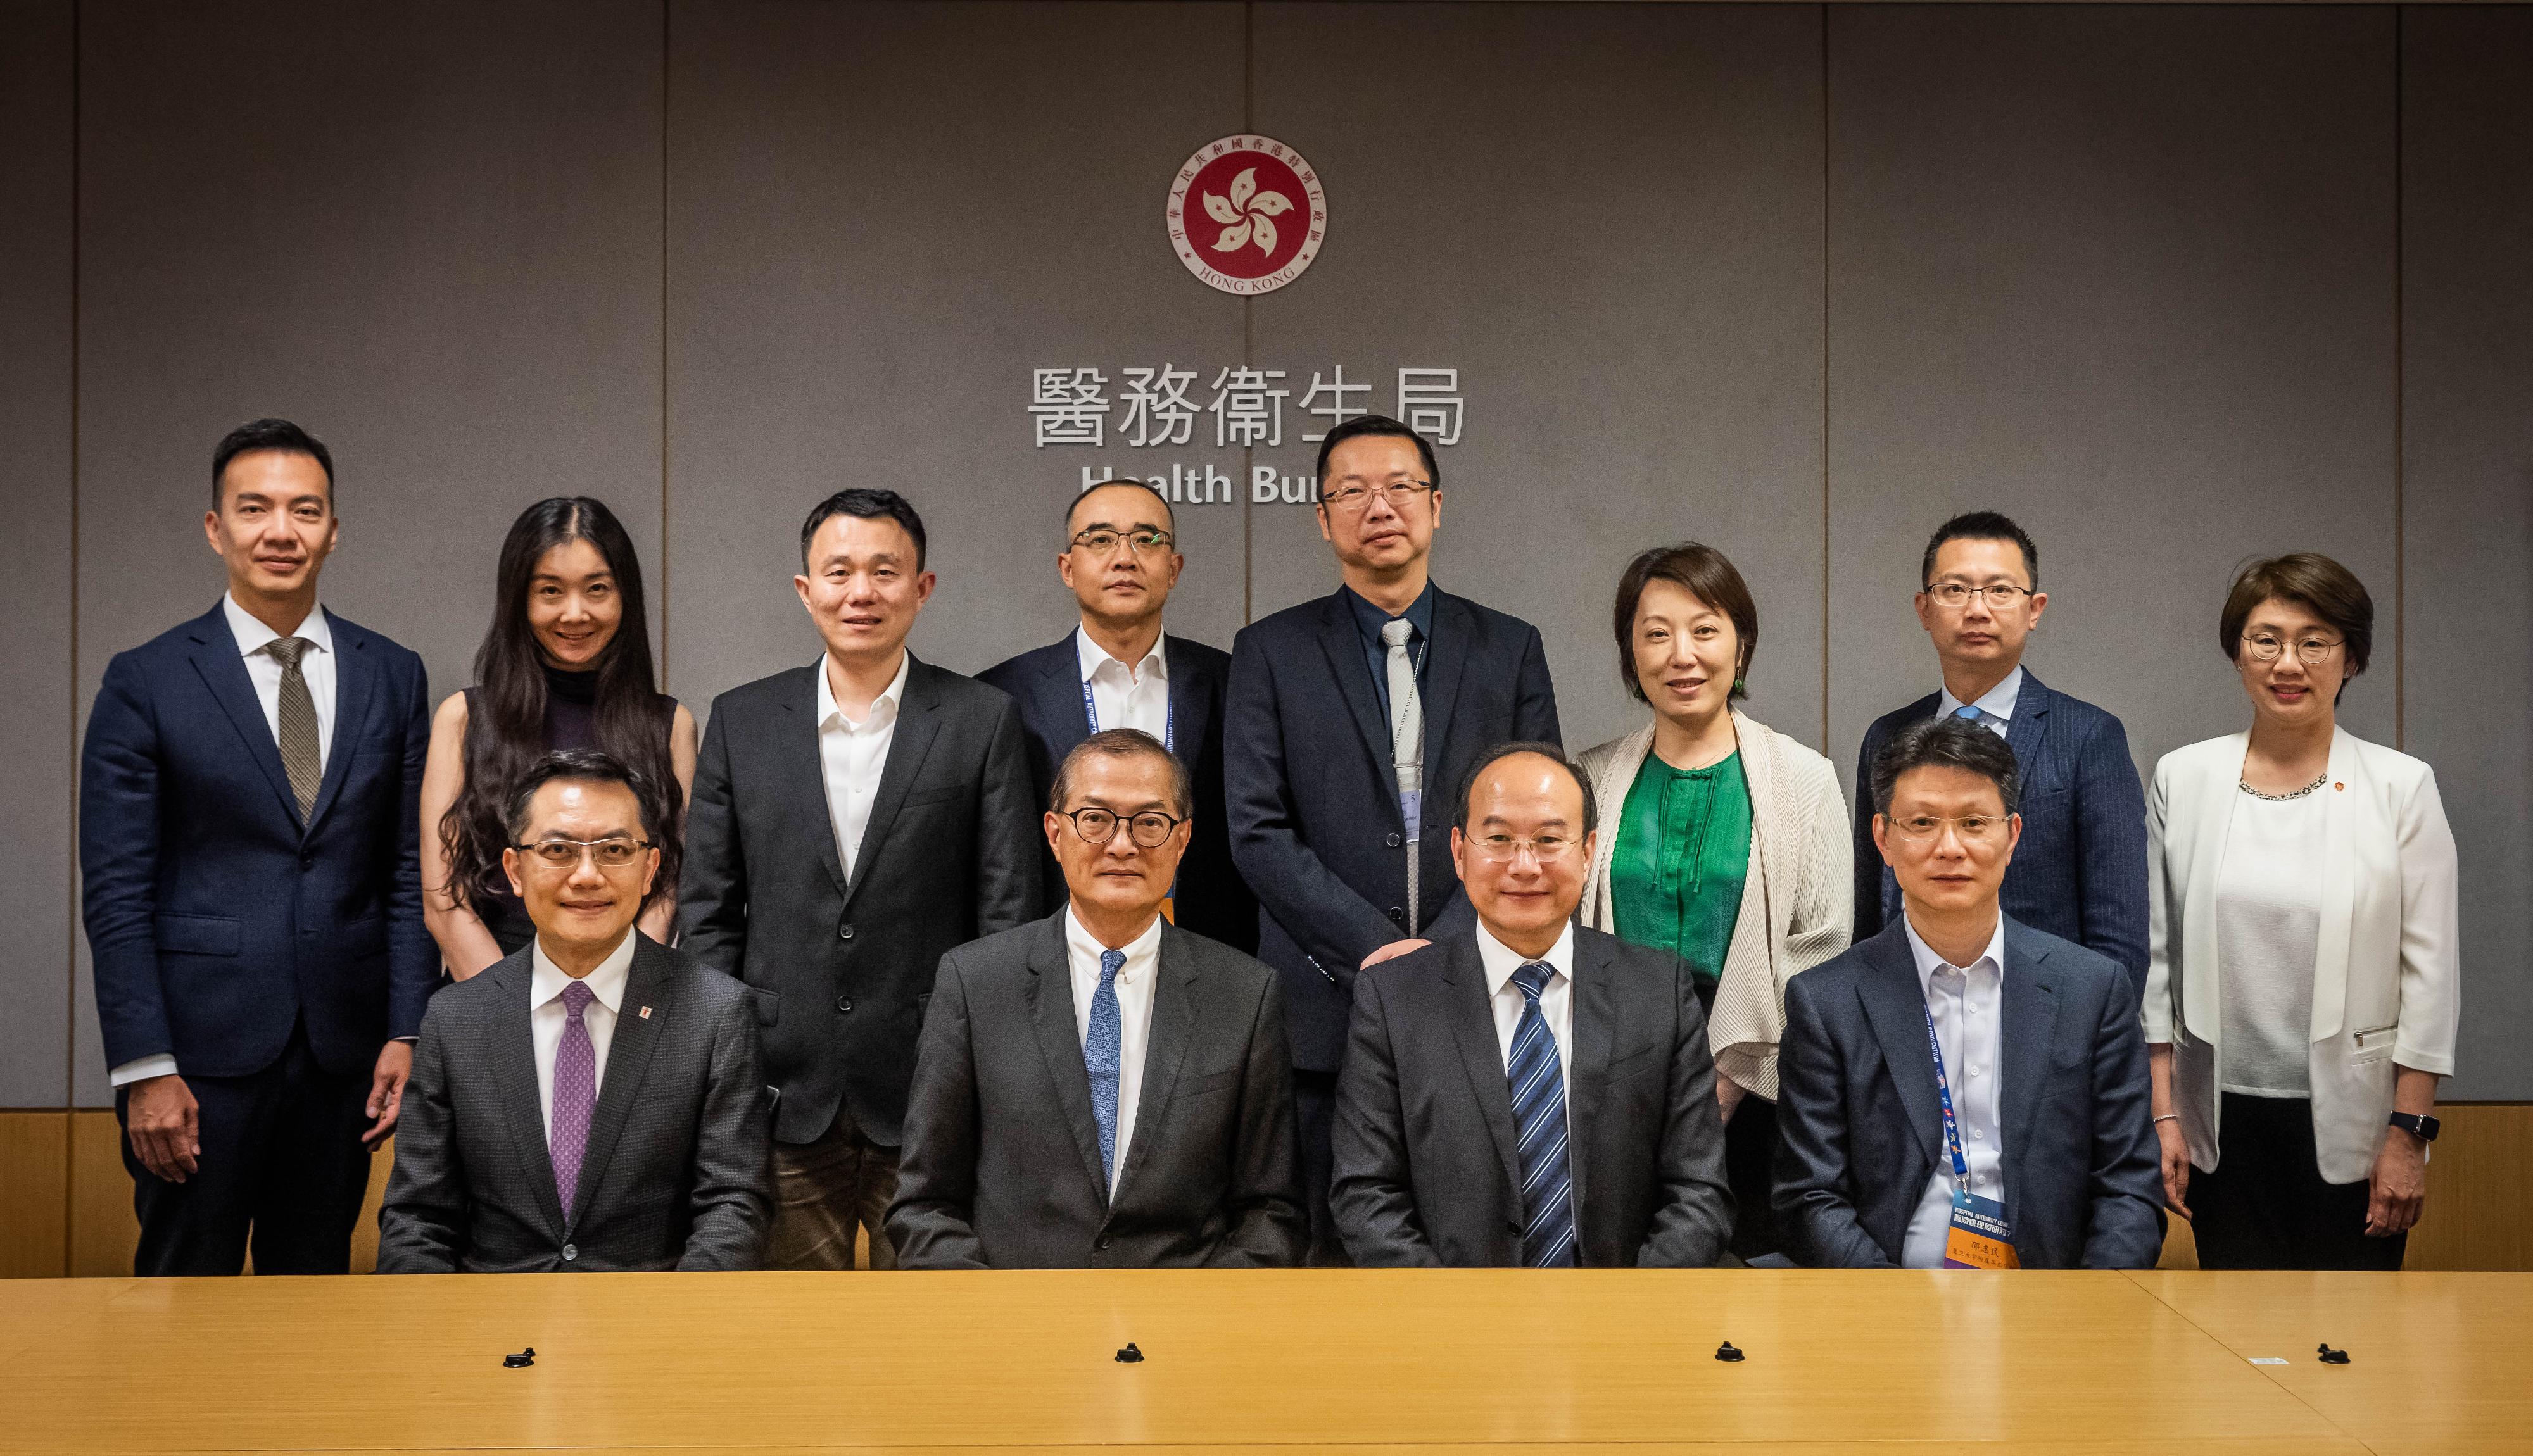 The Secretary for Health, Professor Lo Chung-mau, met with a delegation led by Vice Director General of the Shanghai Hospital Development Center Mr Zheng Ning today (May 17) to explore areas for strengthening healthcare co-operation.  Photo shows Professor Lo (front row, second left); Mr Zheng (front row, second right); and the Director of Health, Dr Ronald Lam (front row, first left), with other attendees of the meeting.